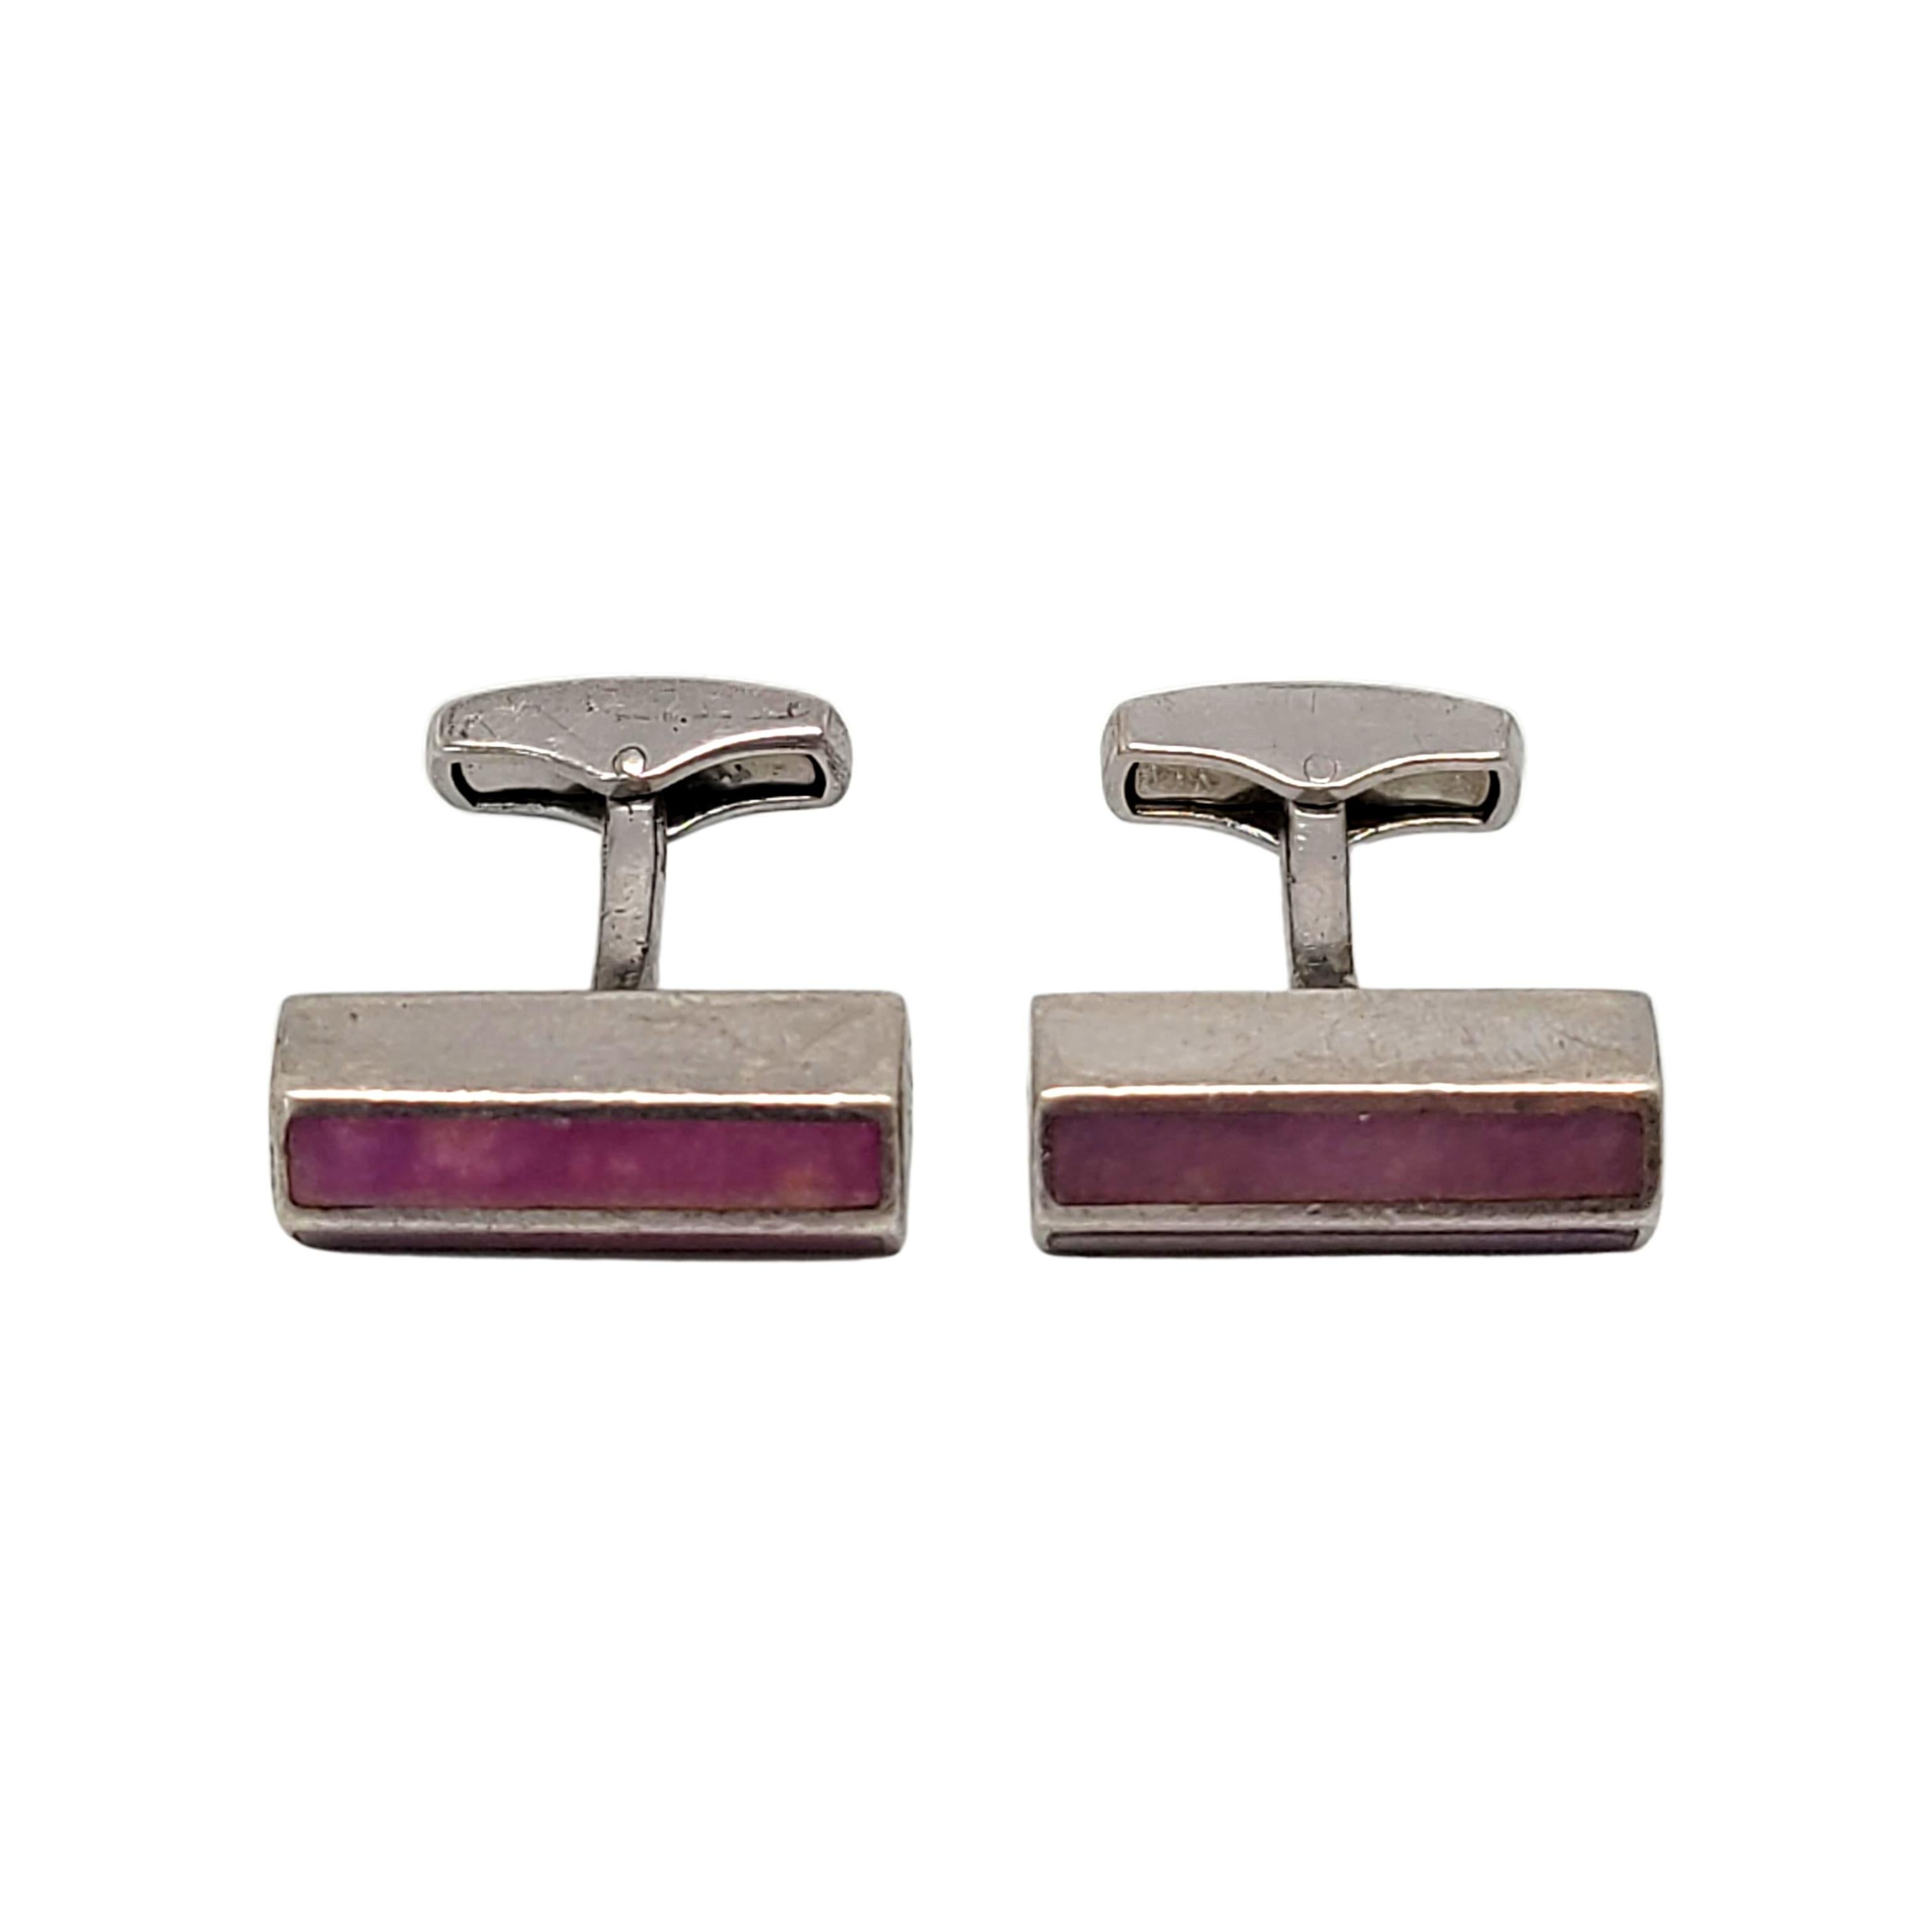 Sterling silver cufflinks by designer EZ of Edinburgh.

Unique hexagon shape, featuring 2 inlaid bars of a light purple cabochon stone.

Cufflinks measures approx 3/4